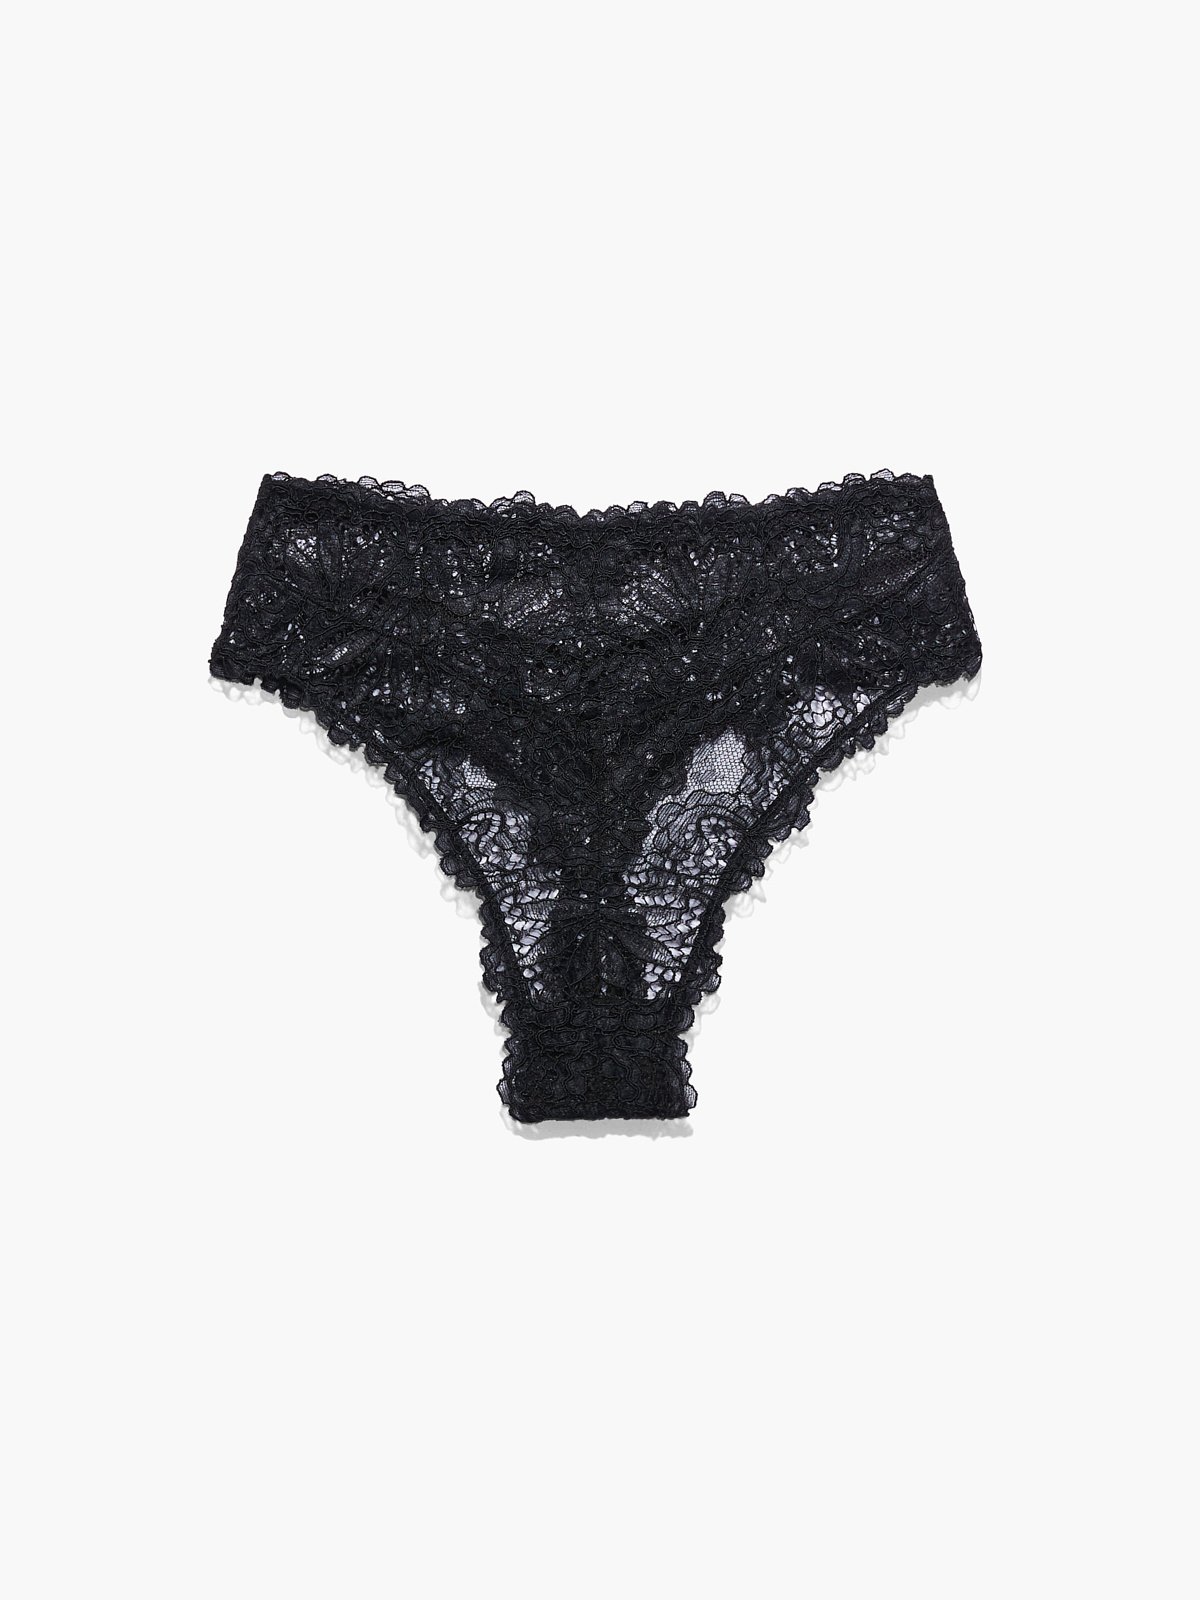 https://cdn.savagex.com/media/images/products/UD2148520-0687/ROMANTIC-CORDED-LACE-HIGH-WAIST-THONG-UD2148520-0687-LAYDOWN-1200x1600.jpg